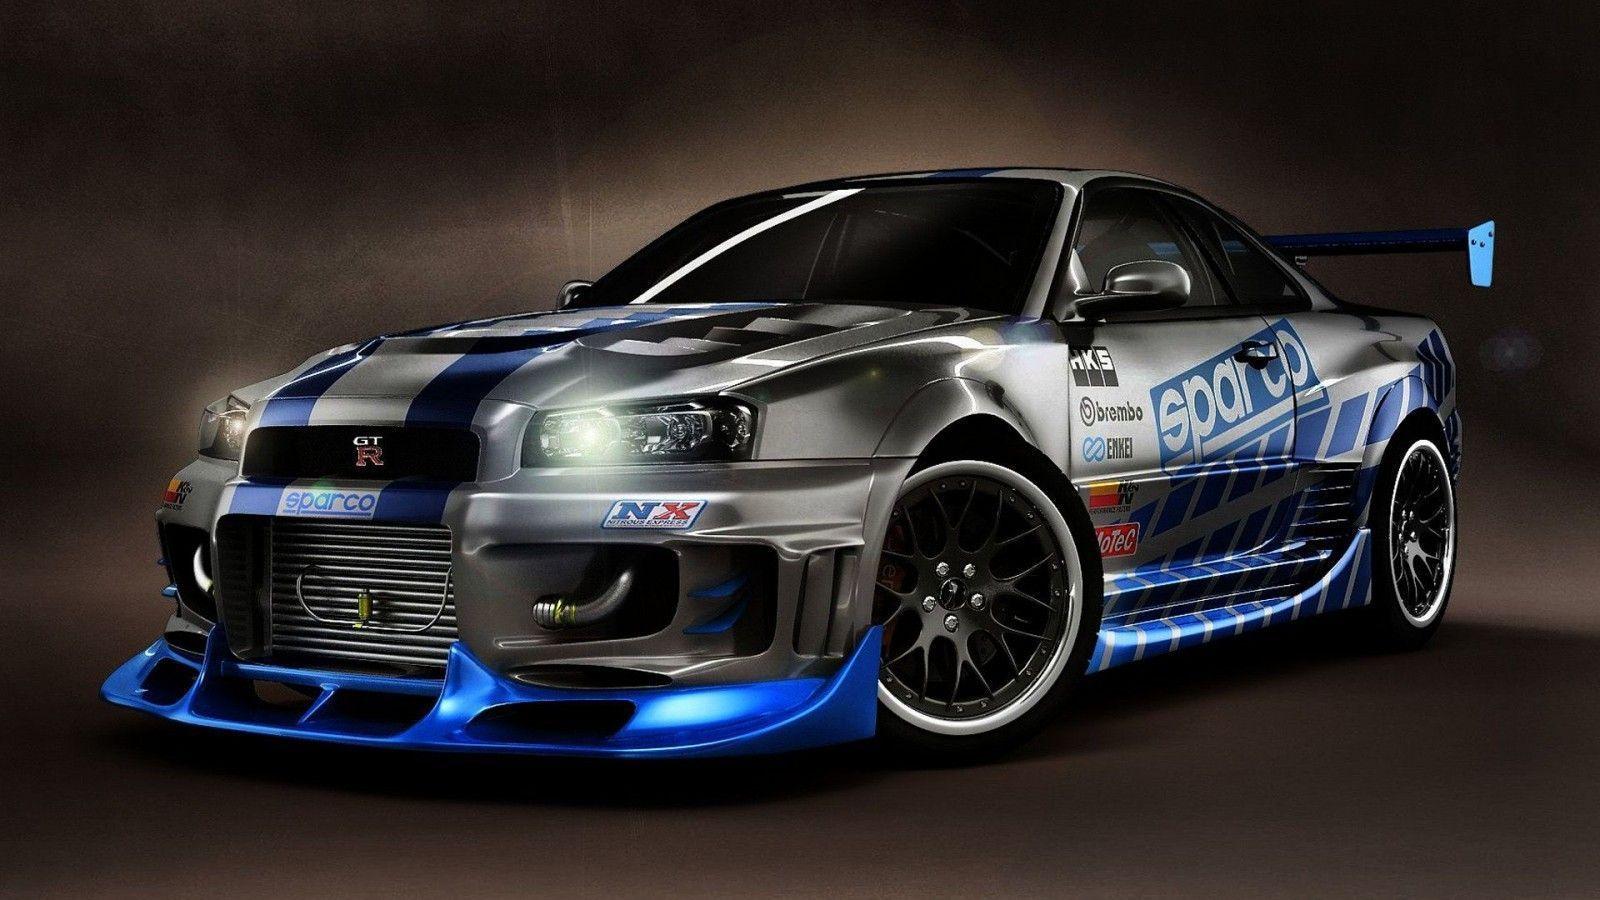 Furious Cars Wallpapers Top Free Furious Cars Backgrounds